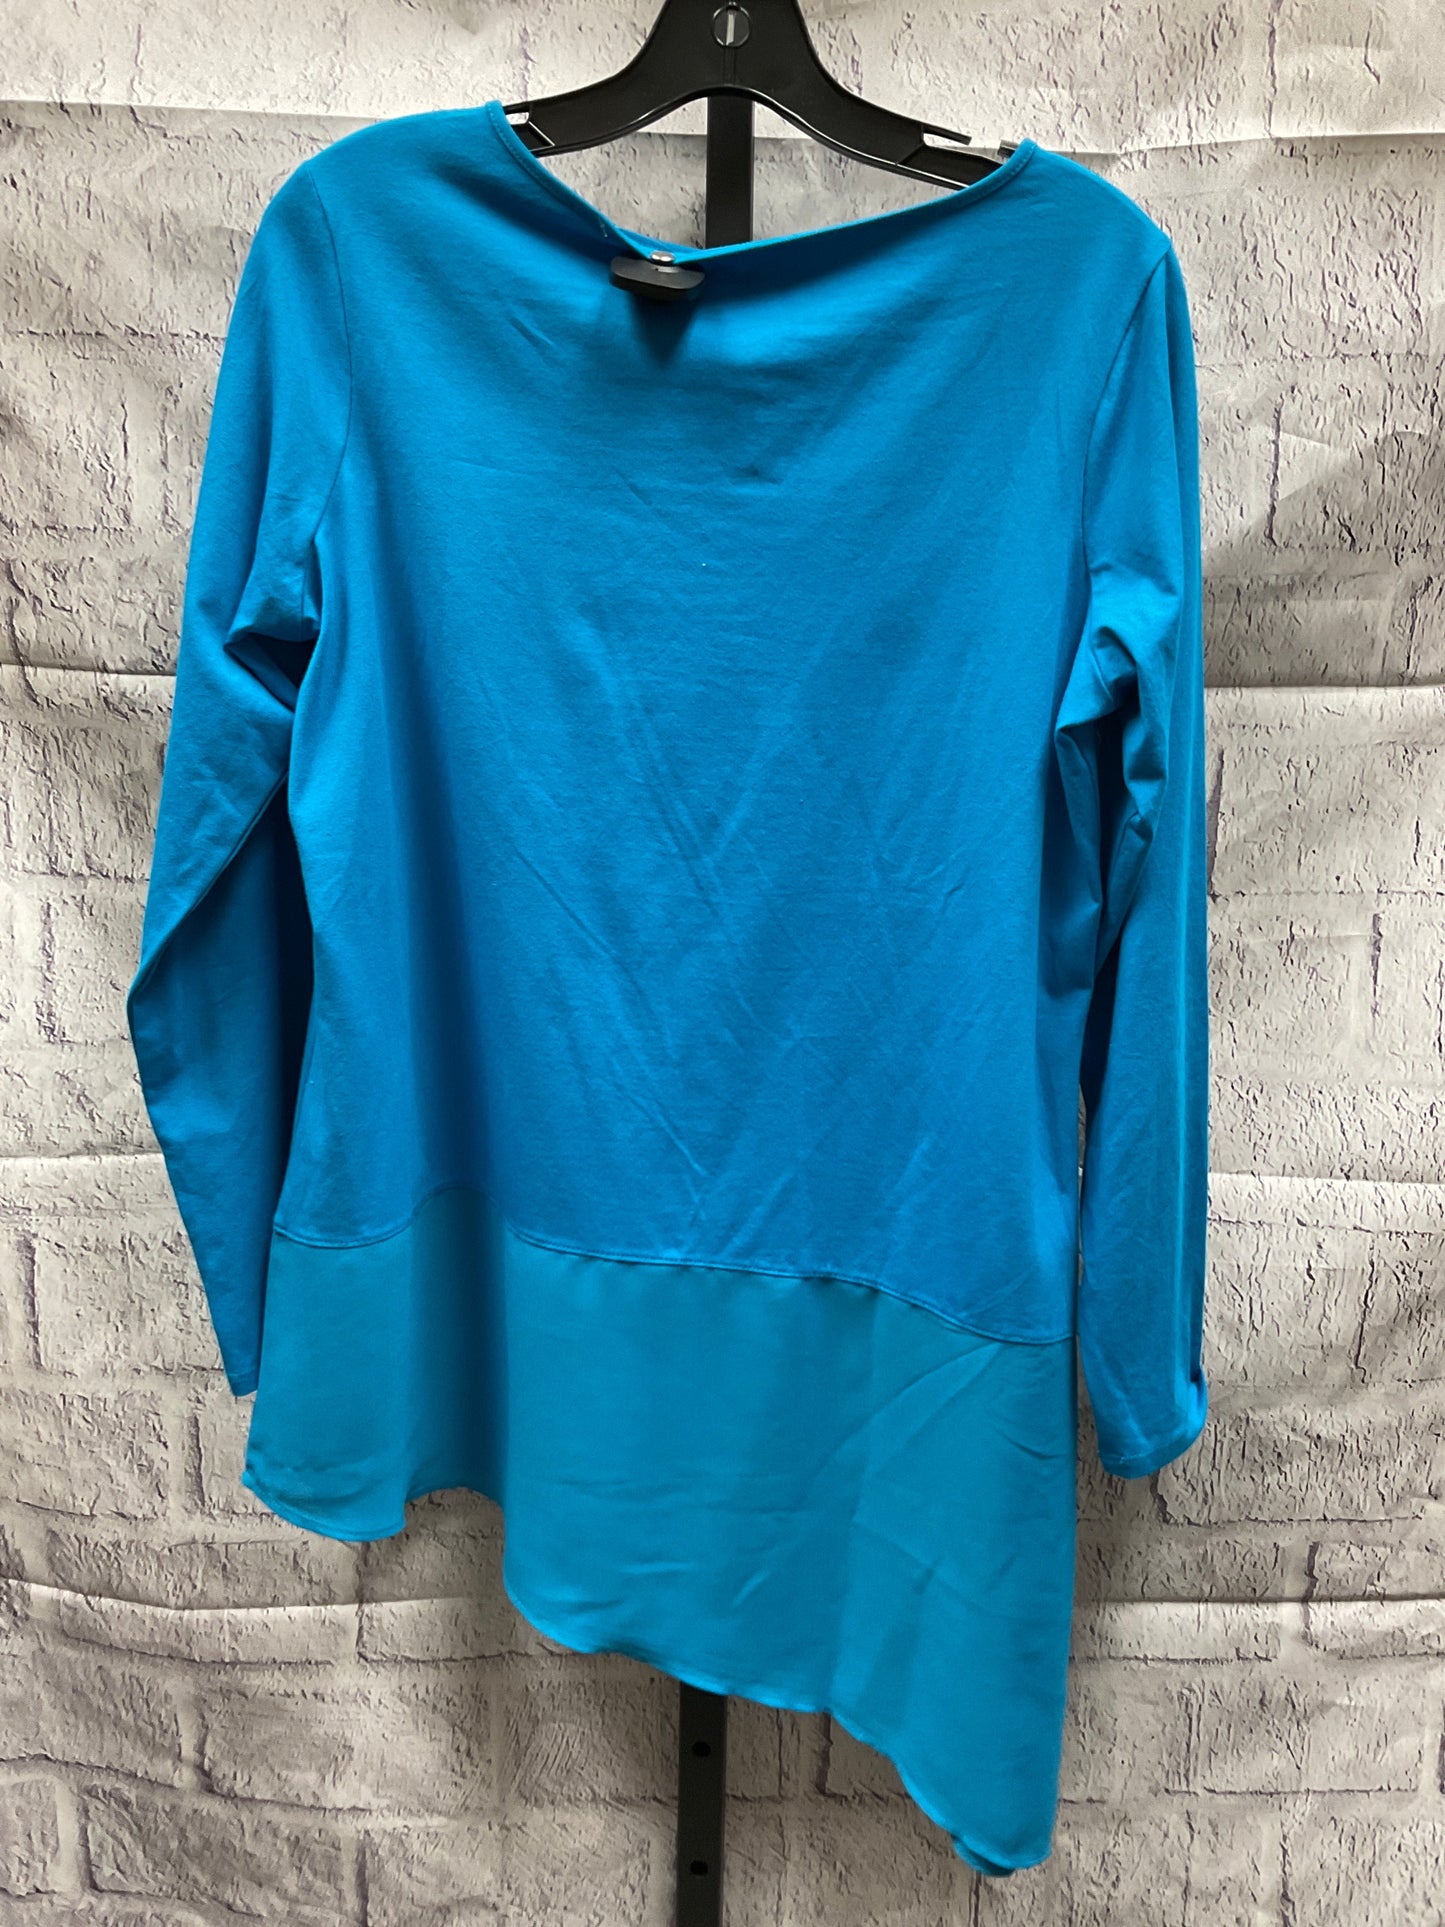 Top Long Sleeve By Diane Gilman  Size: M